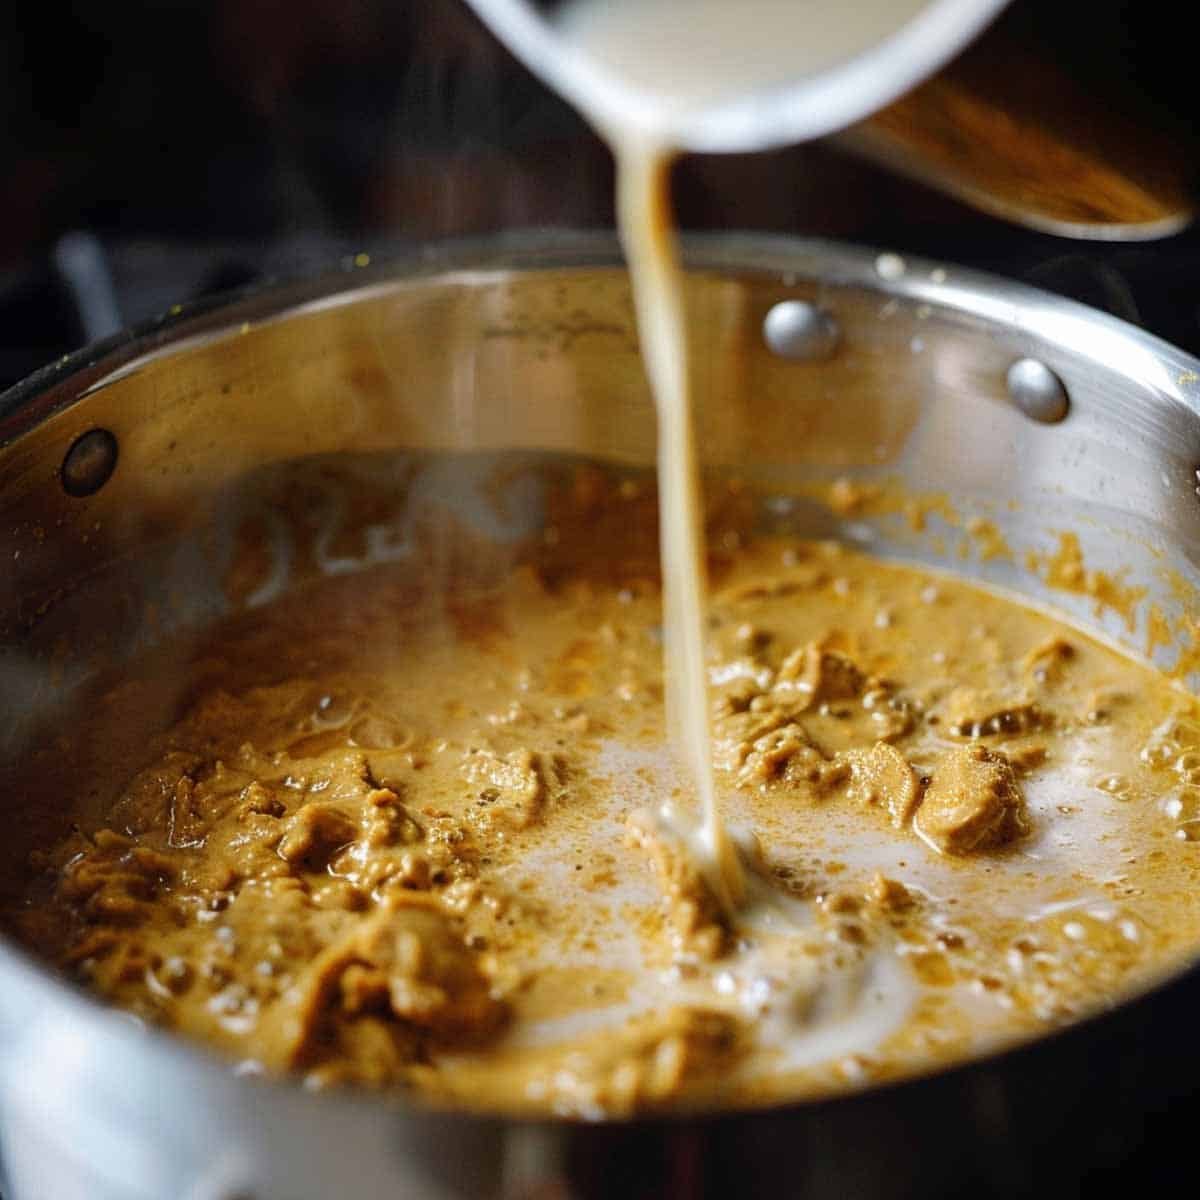 Pour coconut milk and water, stirring to combine with curry paste. Simmer gently to create a rich, creamy sauce that balances the heat.